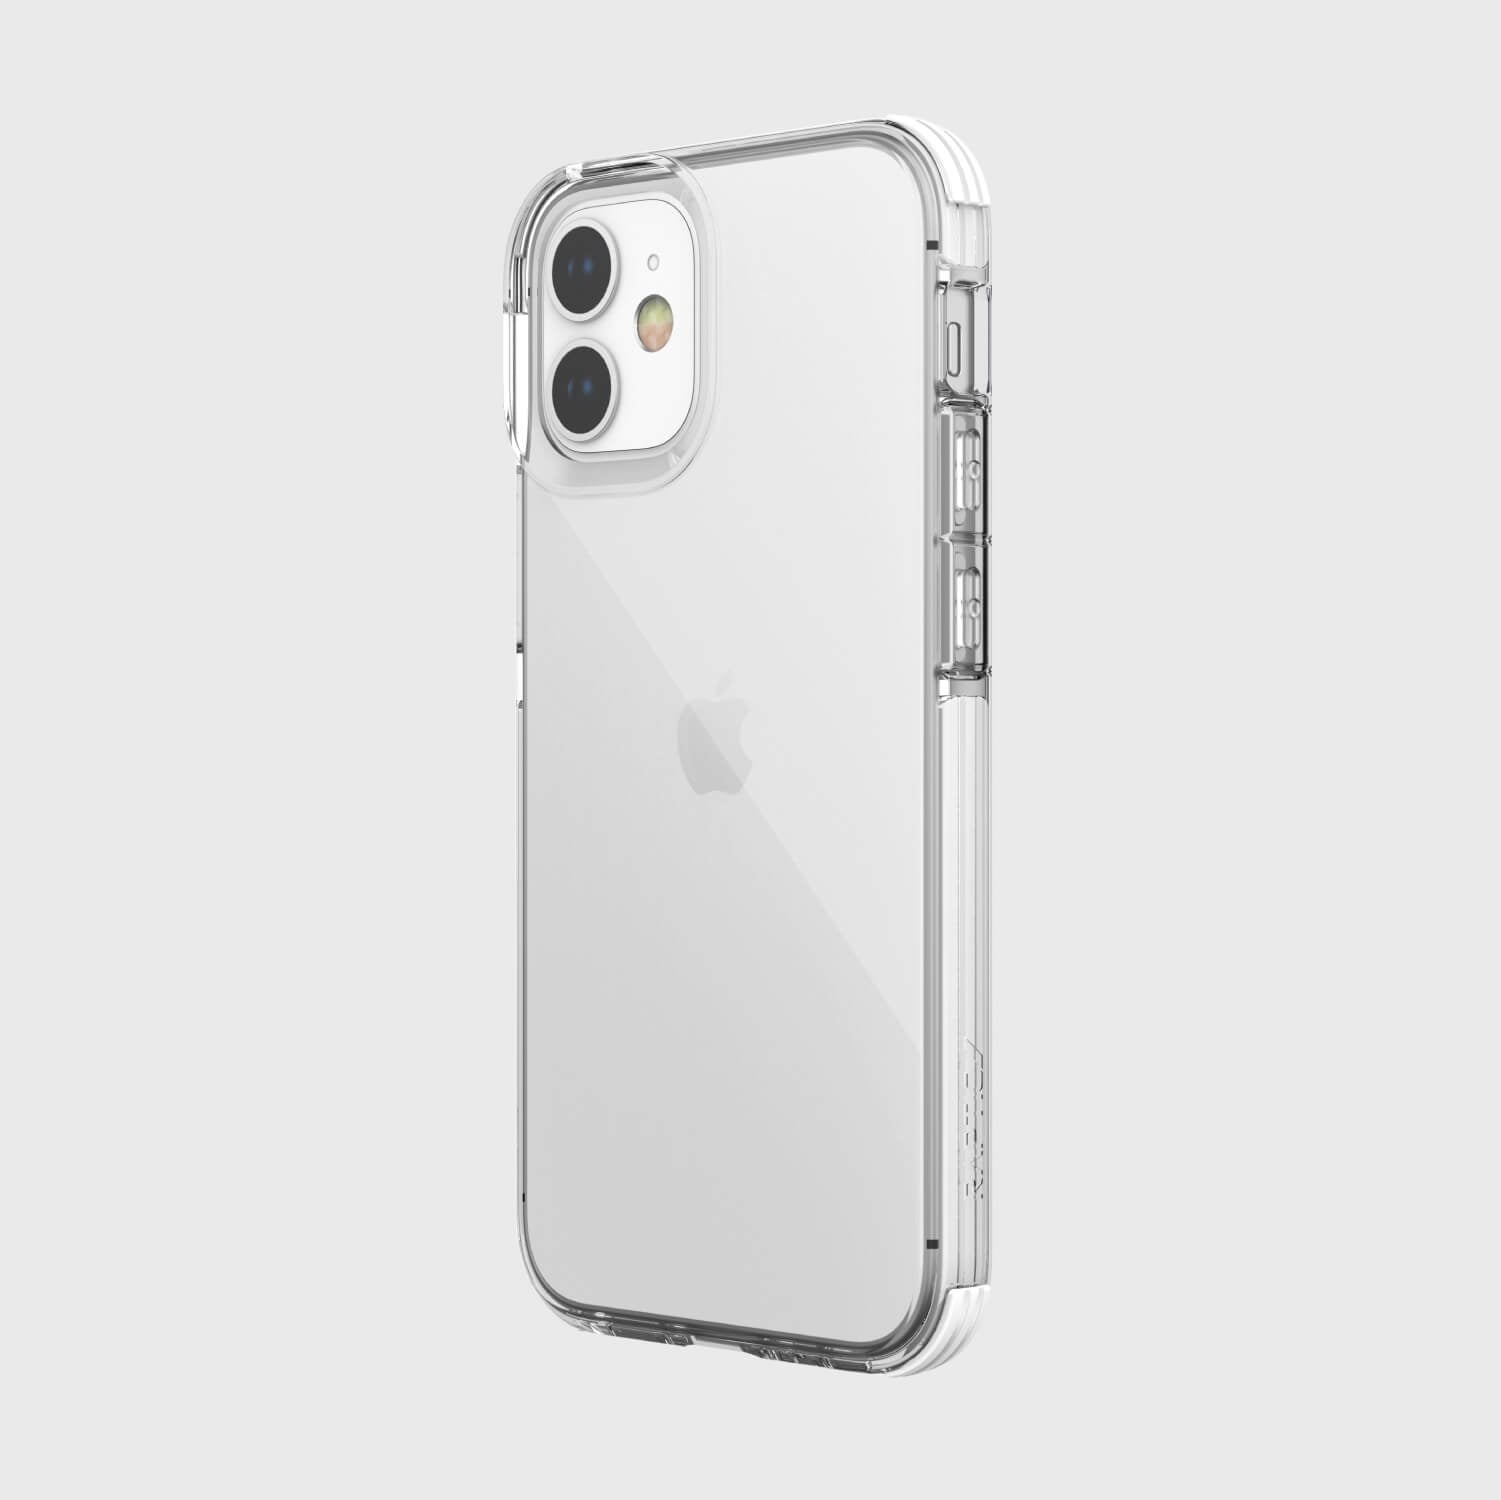 The back view of a Raptic Clear iPhone 12 Mini case with wireless charging compatibility.